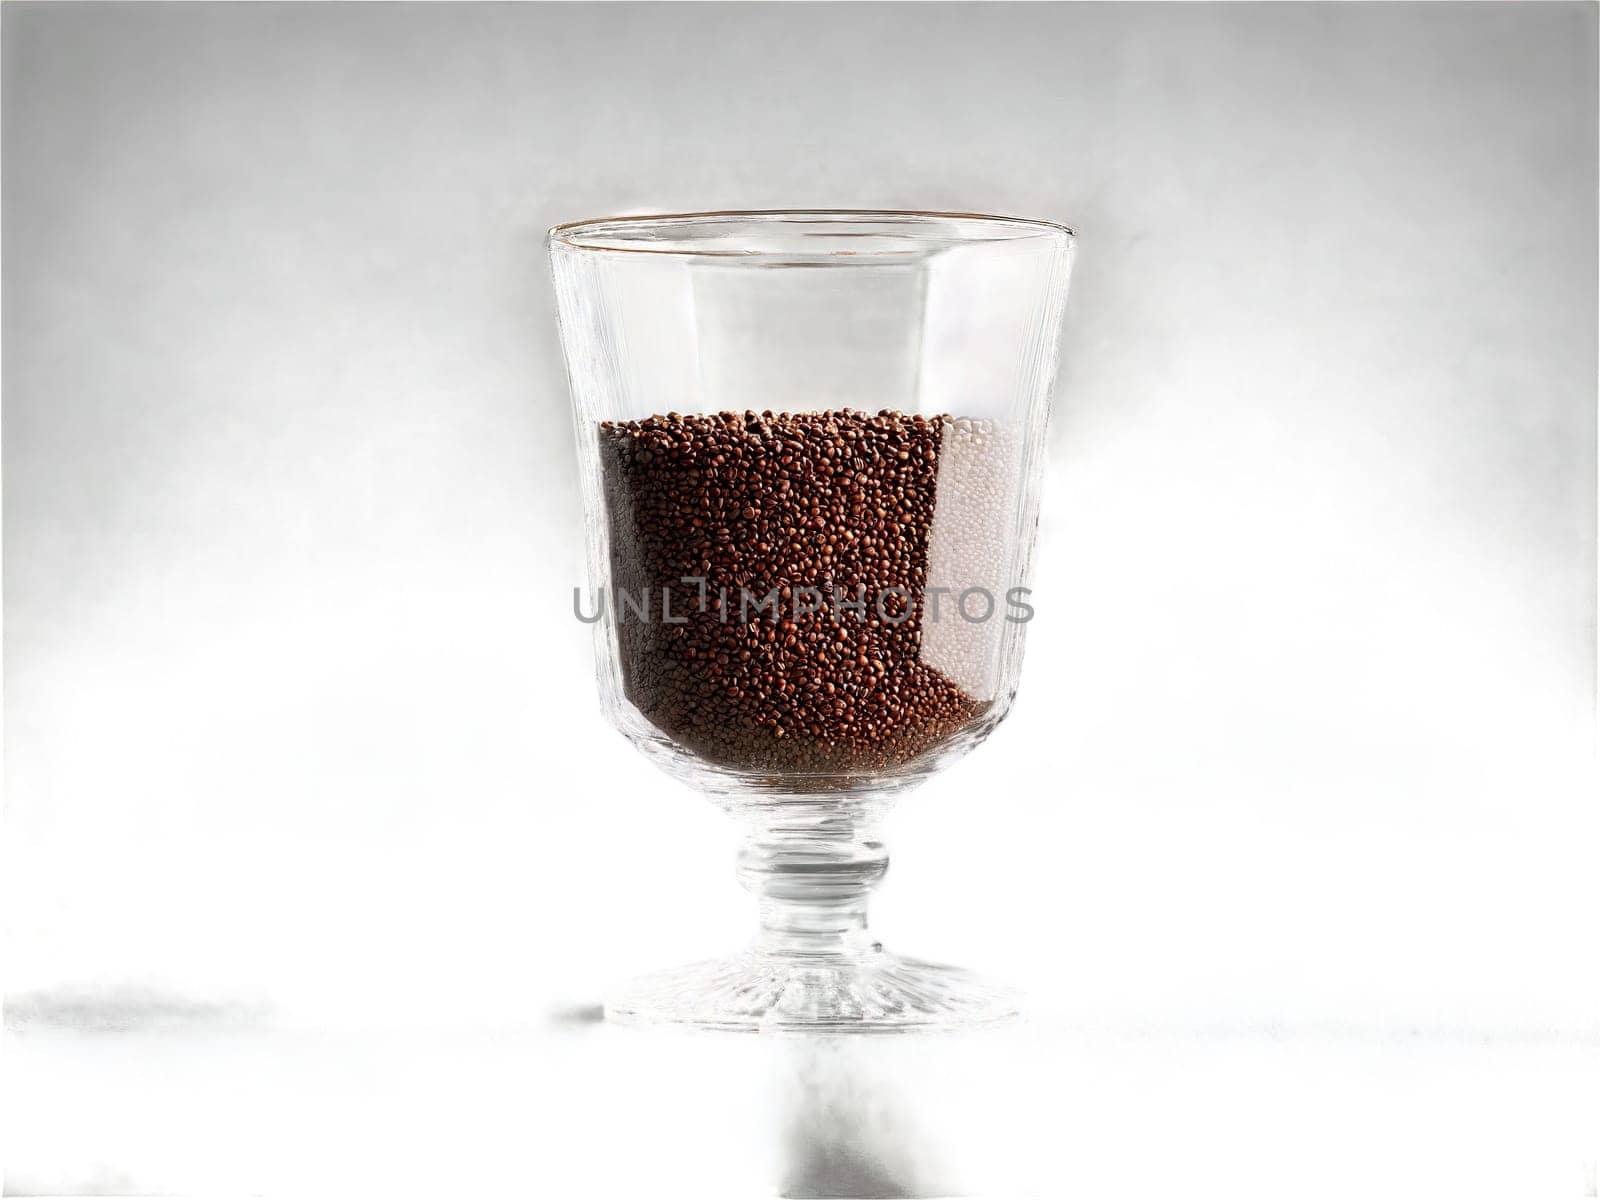 Instant coffee in a simple glass instant granules falling dynamic dissolve scene modern minimalist hero. Drink isolated on transparent background.